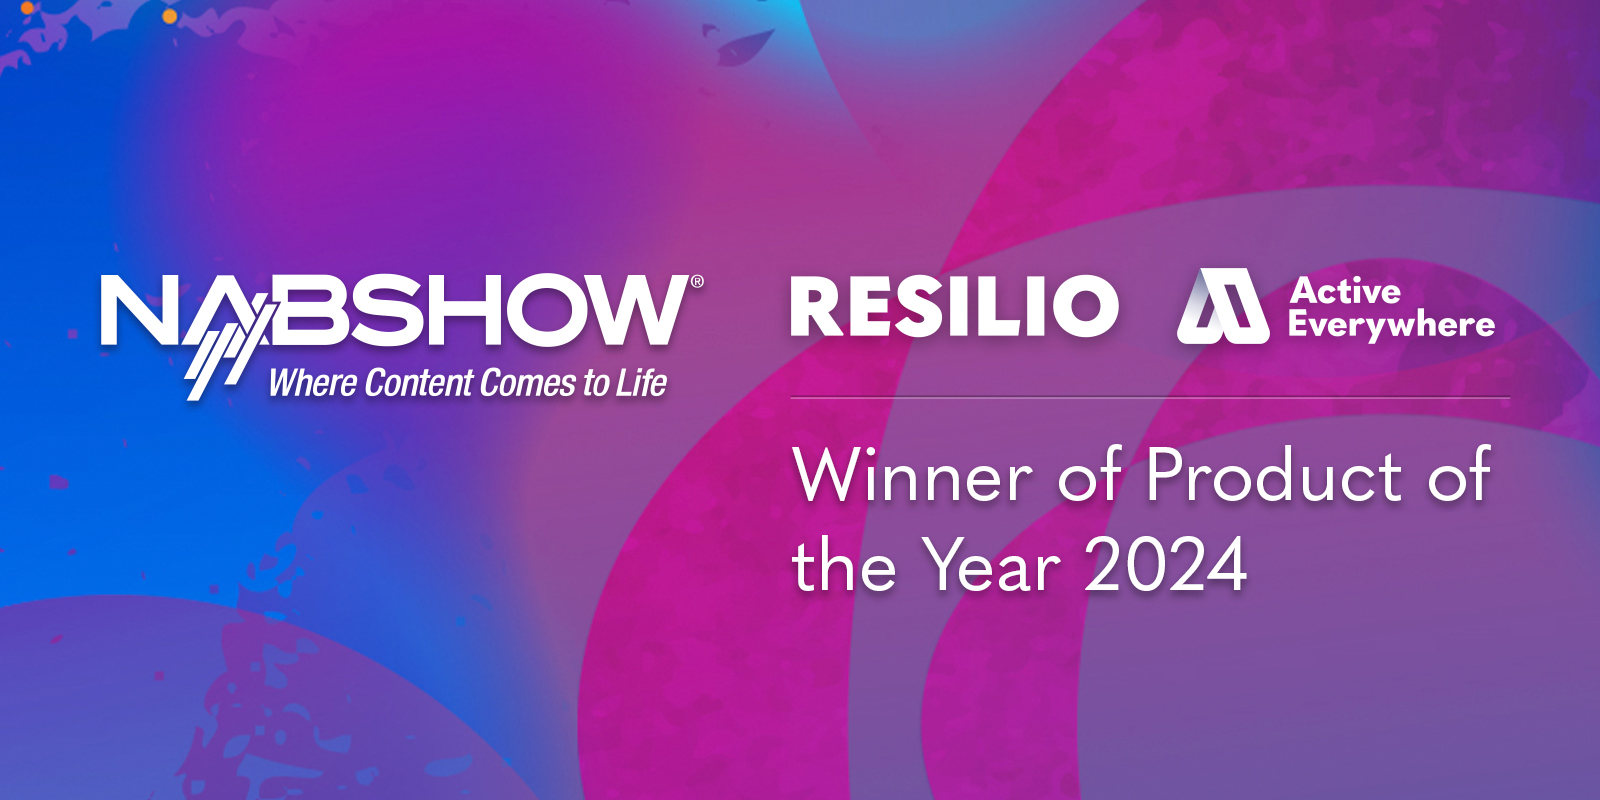 The NAB Show recognizes Resilio with the ‘Product of the Year 2024’ award.